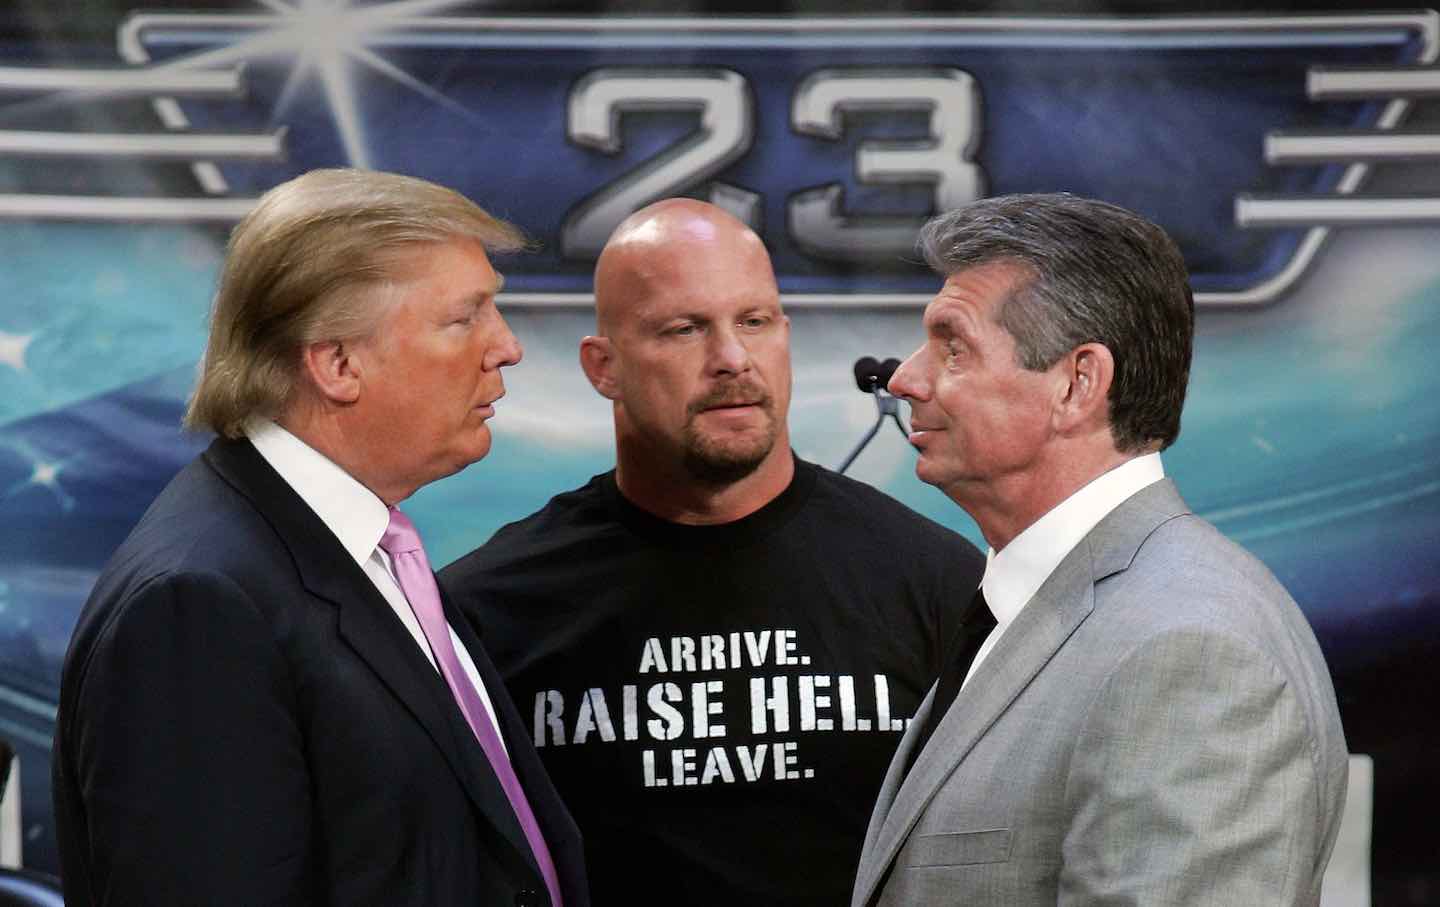 Donald Trump, “Stone Cold” Steve Austin, and Vince McMhaon at a press conference before Wrestlemania 23, 2007.